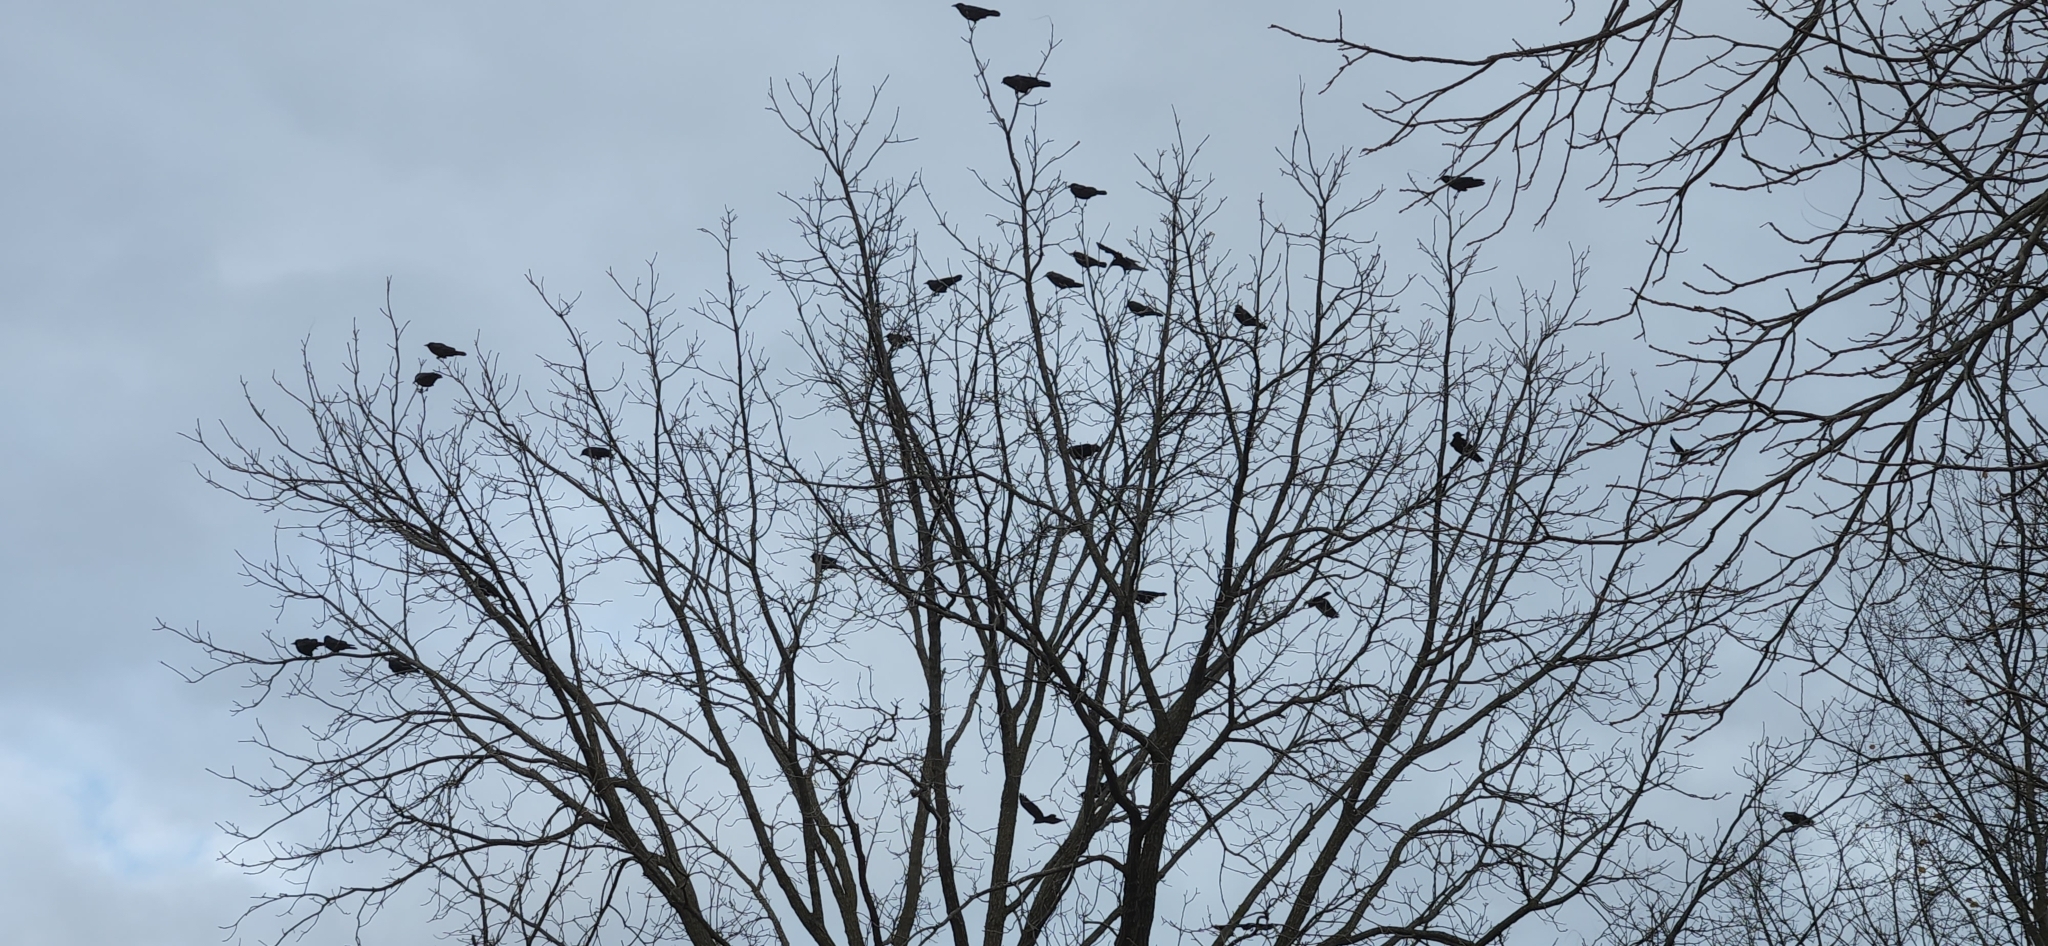 Flock of Amercian Crows in a tree on a cloudy day by Hilbert on iNaturalist